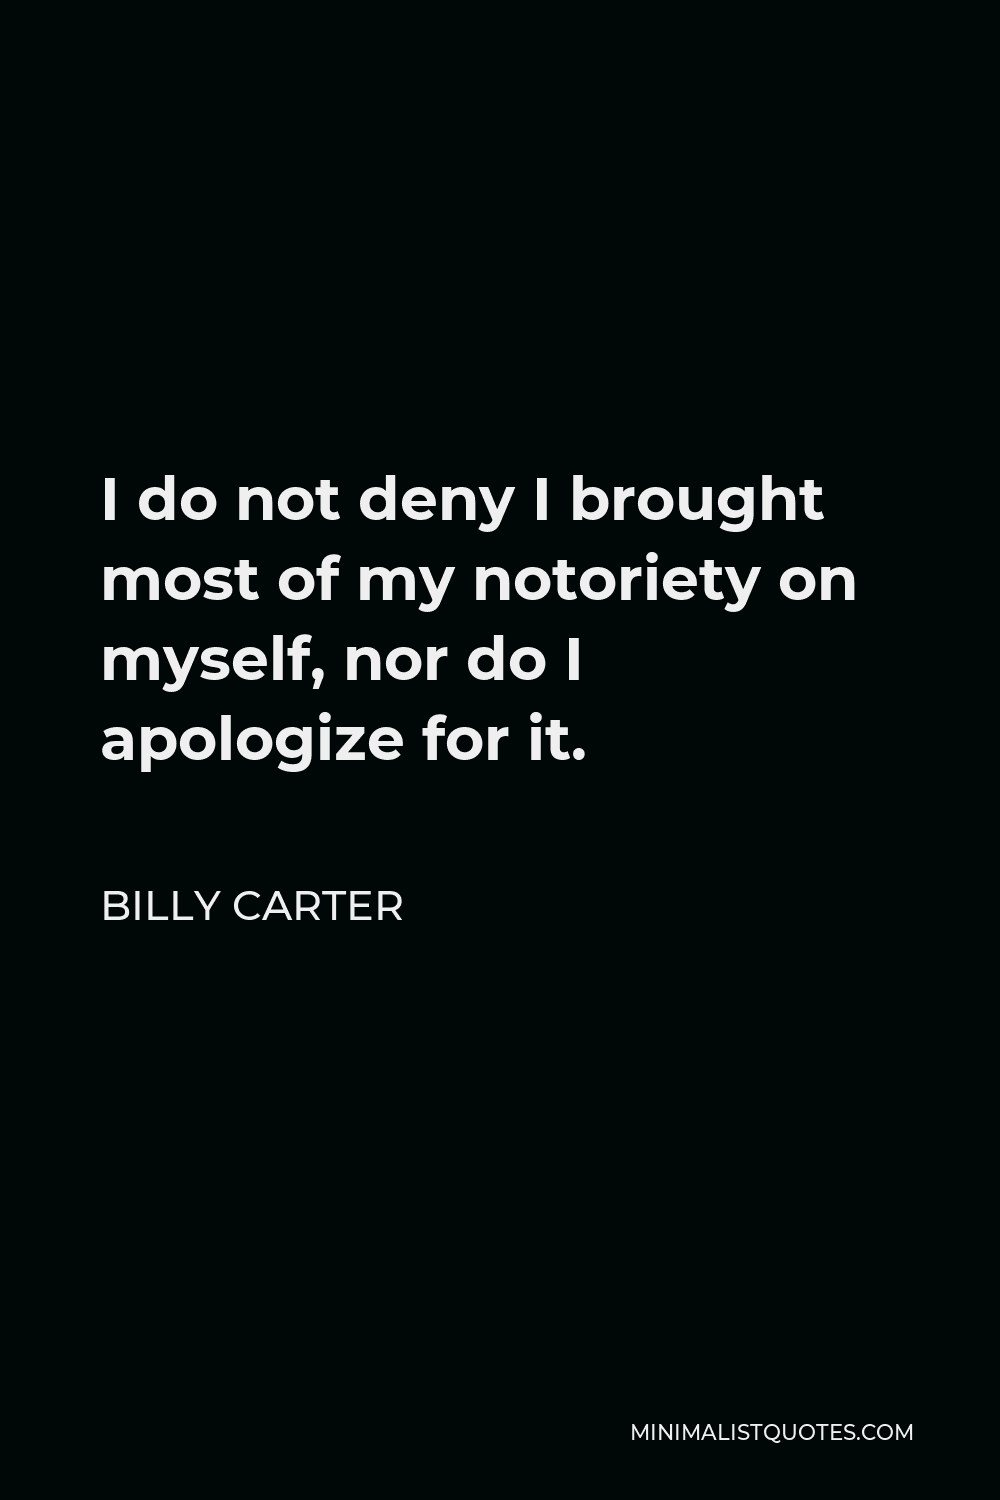 Billy Carter Quote - I do not deny I brought most of my notoriety on myself, nor do I apologize for it.